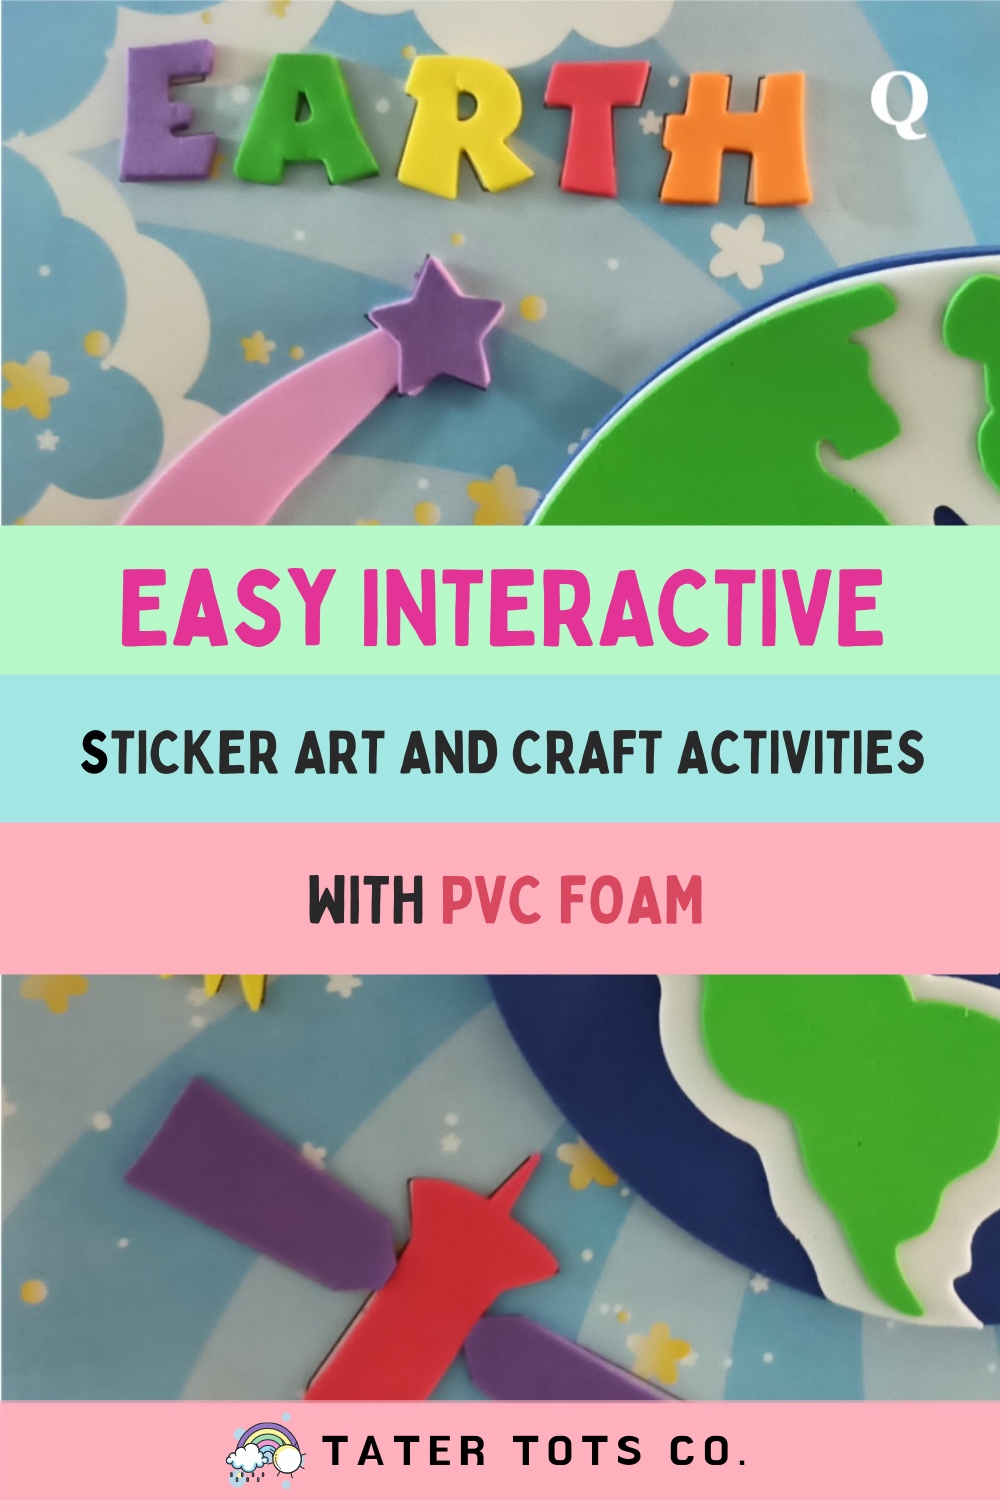 https://tatertotsco.com/wp-content/uploads/2021/09/Easy-Interactive-Sticker-Art-And-Craft-Activities-With-PVC-Foam.png